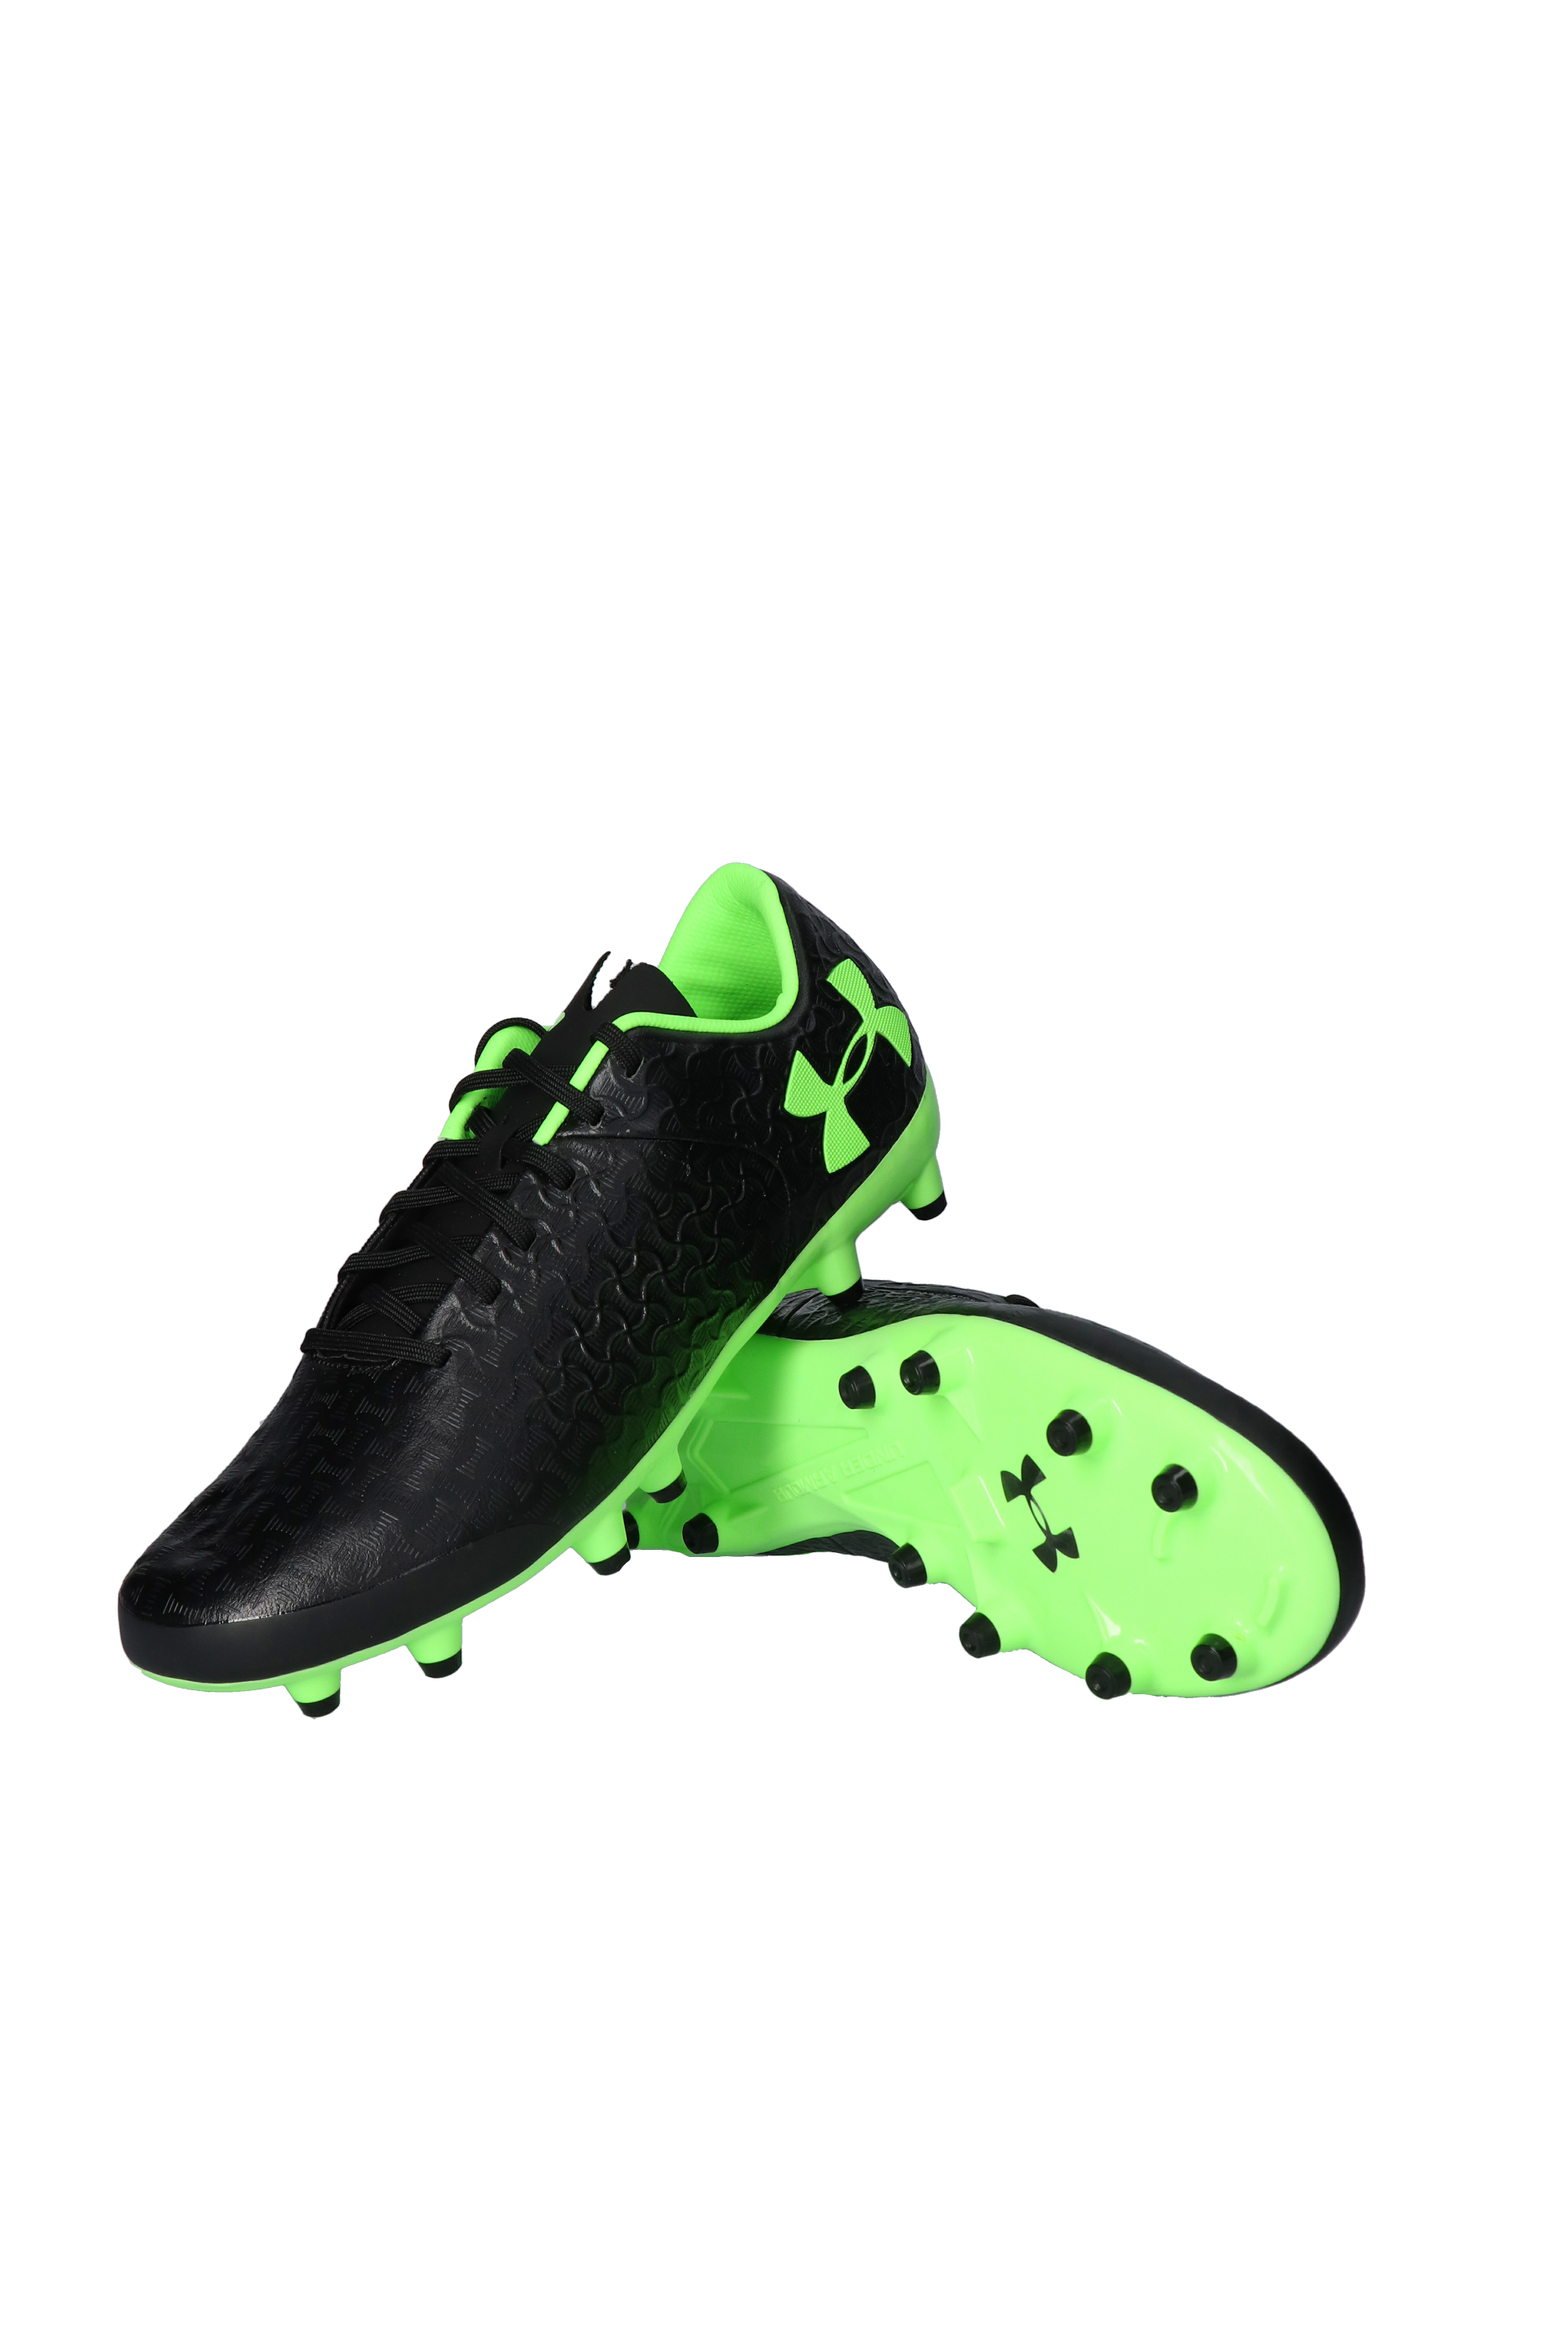 Football Boots Transparent File